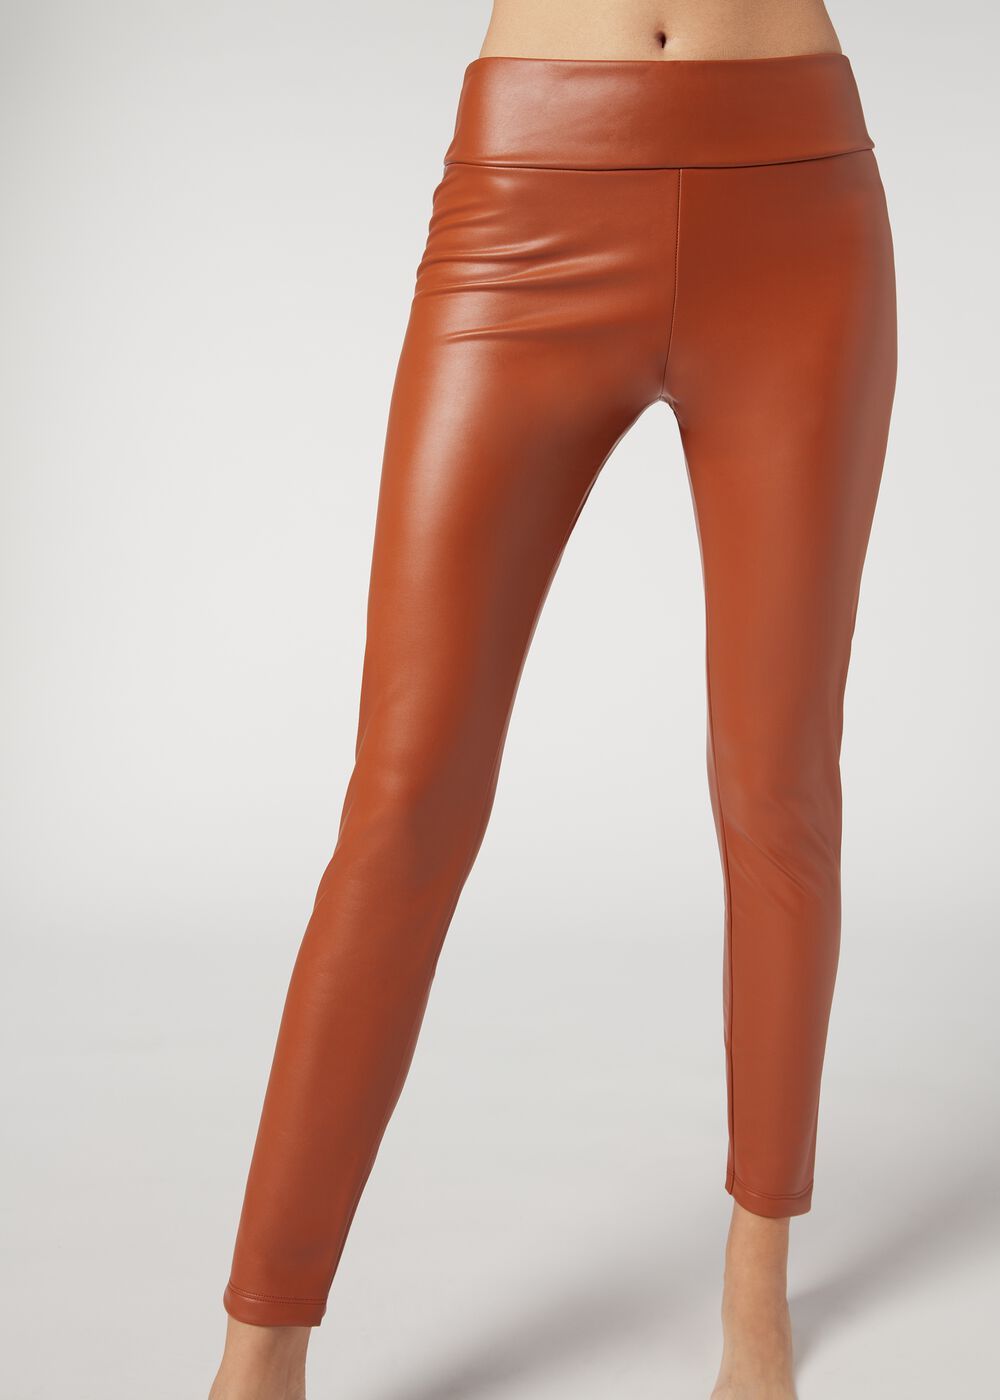 The Only Thing Better Than Spanx Leather Leggings - Chasing Cinderella